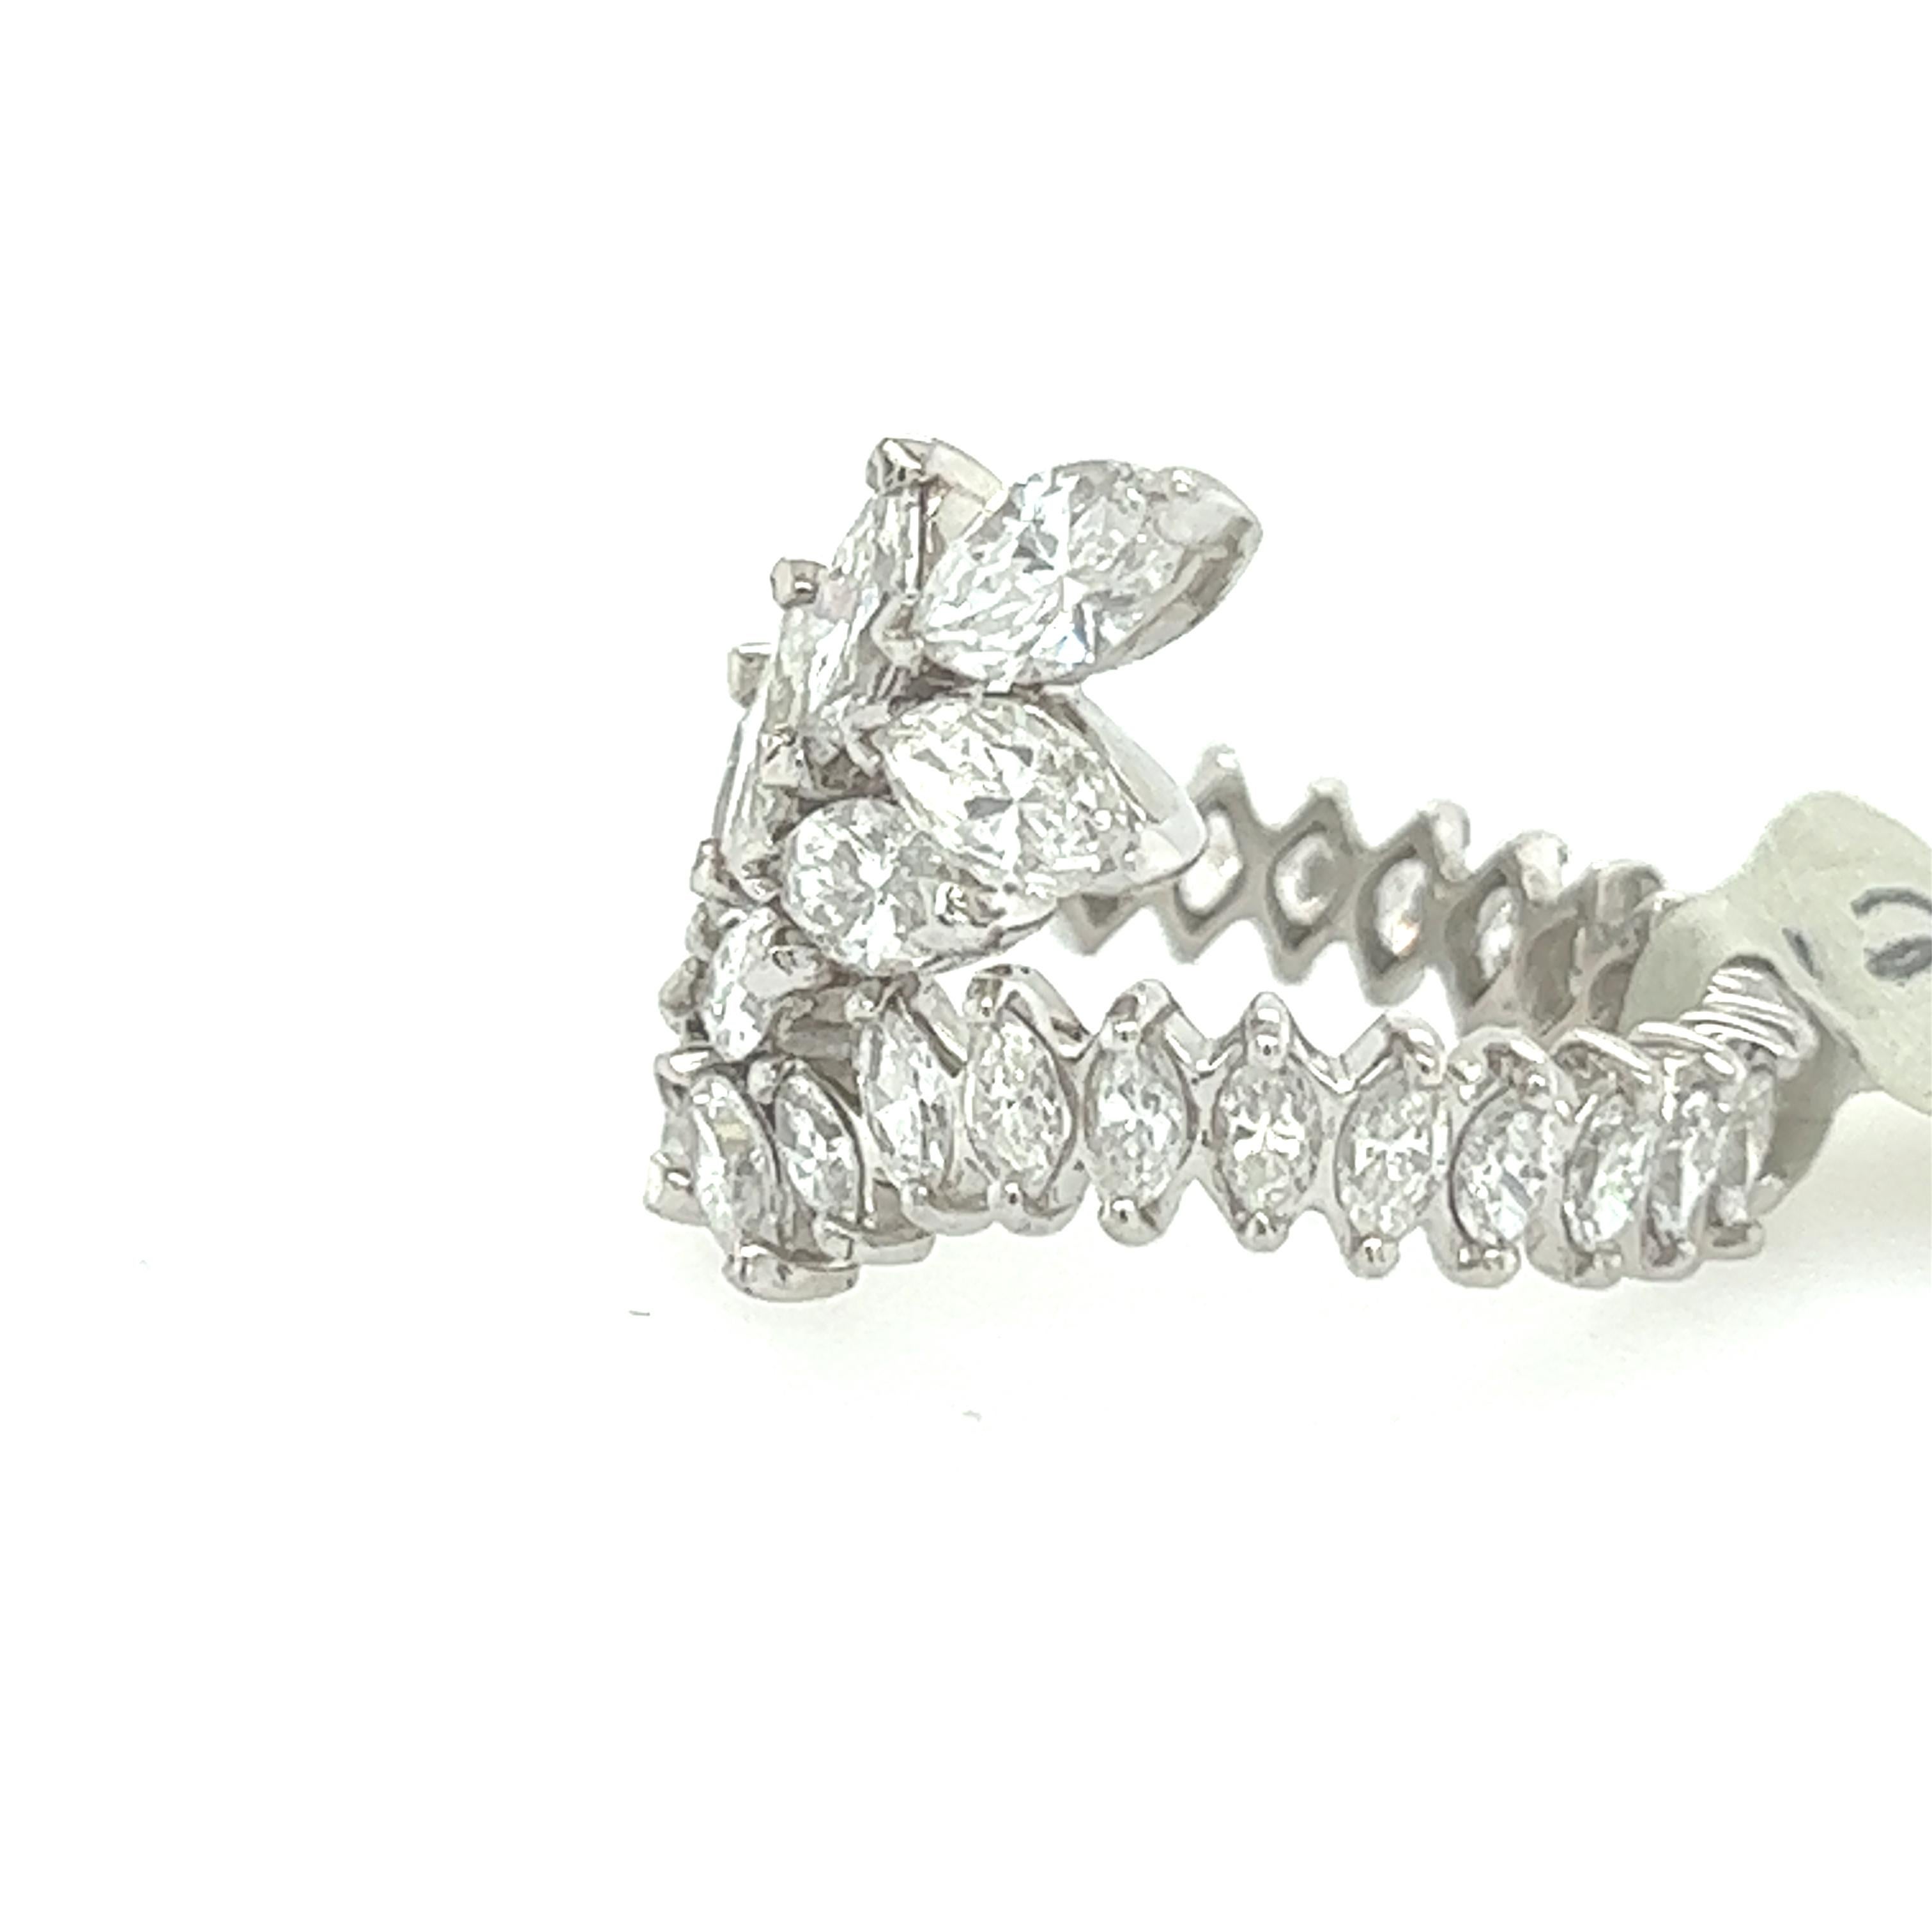 This exquisite 5.00 Carat Marquise Diamond Eternity Band is a stunning example of vintage jewelry from the mid-twentieth century. Crafted in luxurious platinum, the band features a continuous row of marquise-cut diamonds that sparkle and shine from